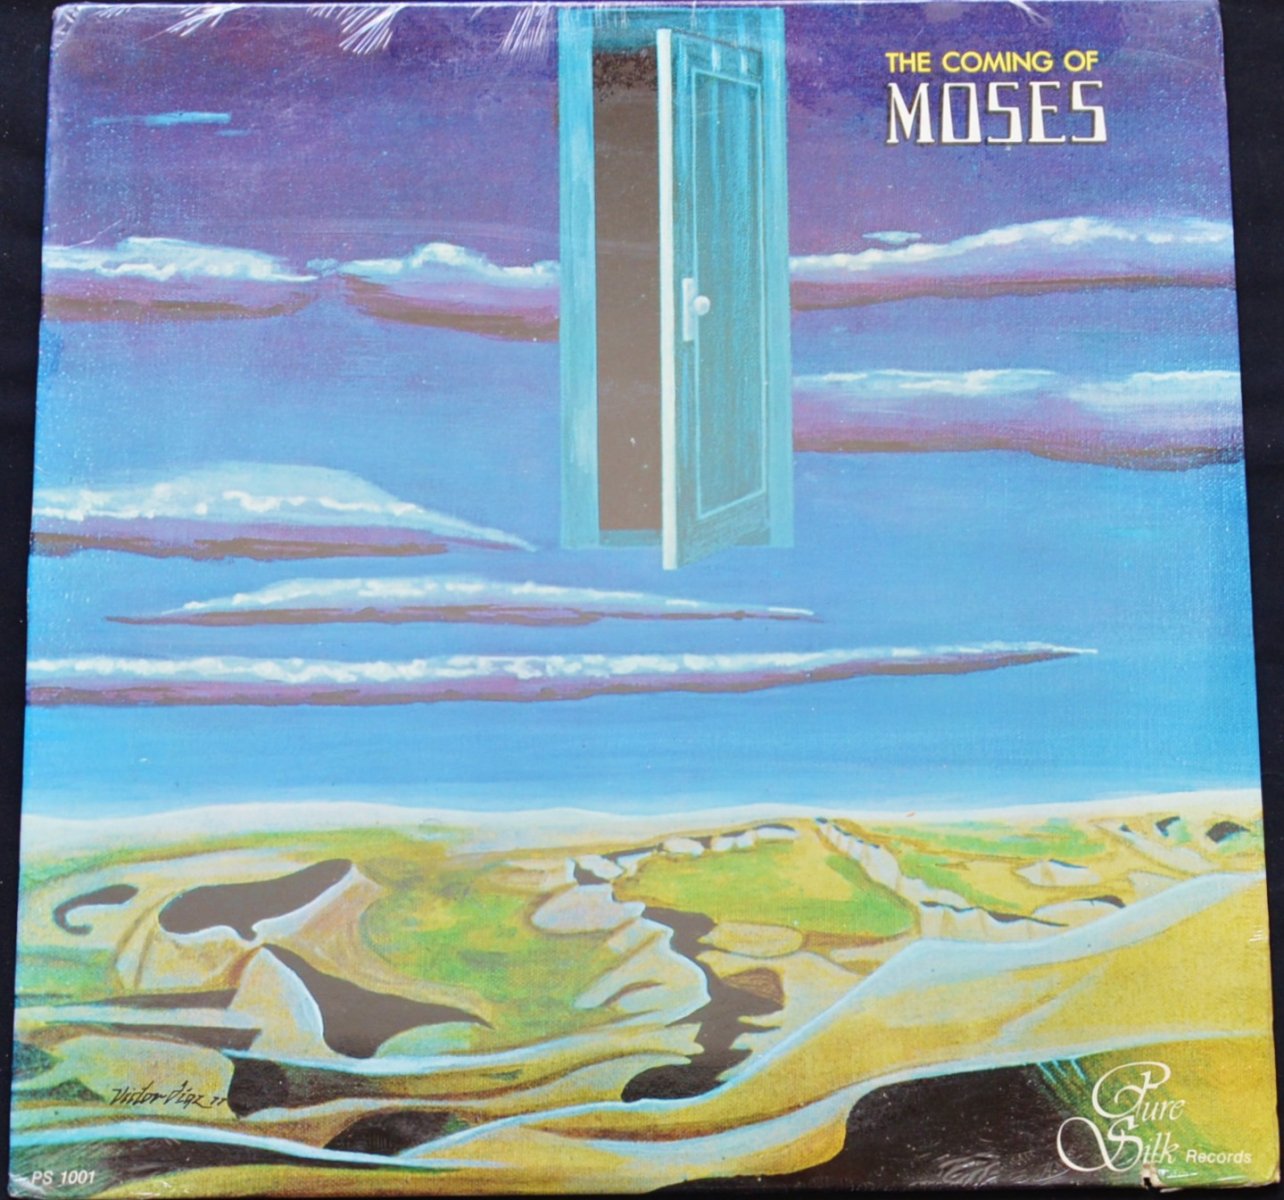 MOSES / THE COMING OF MOSES (LP)